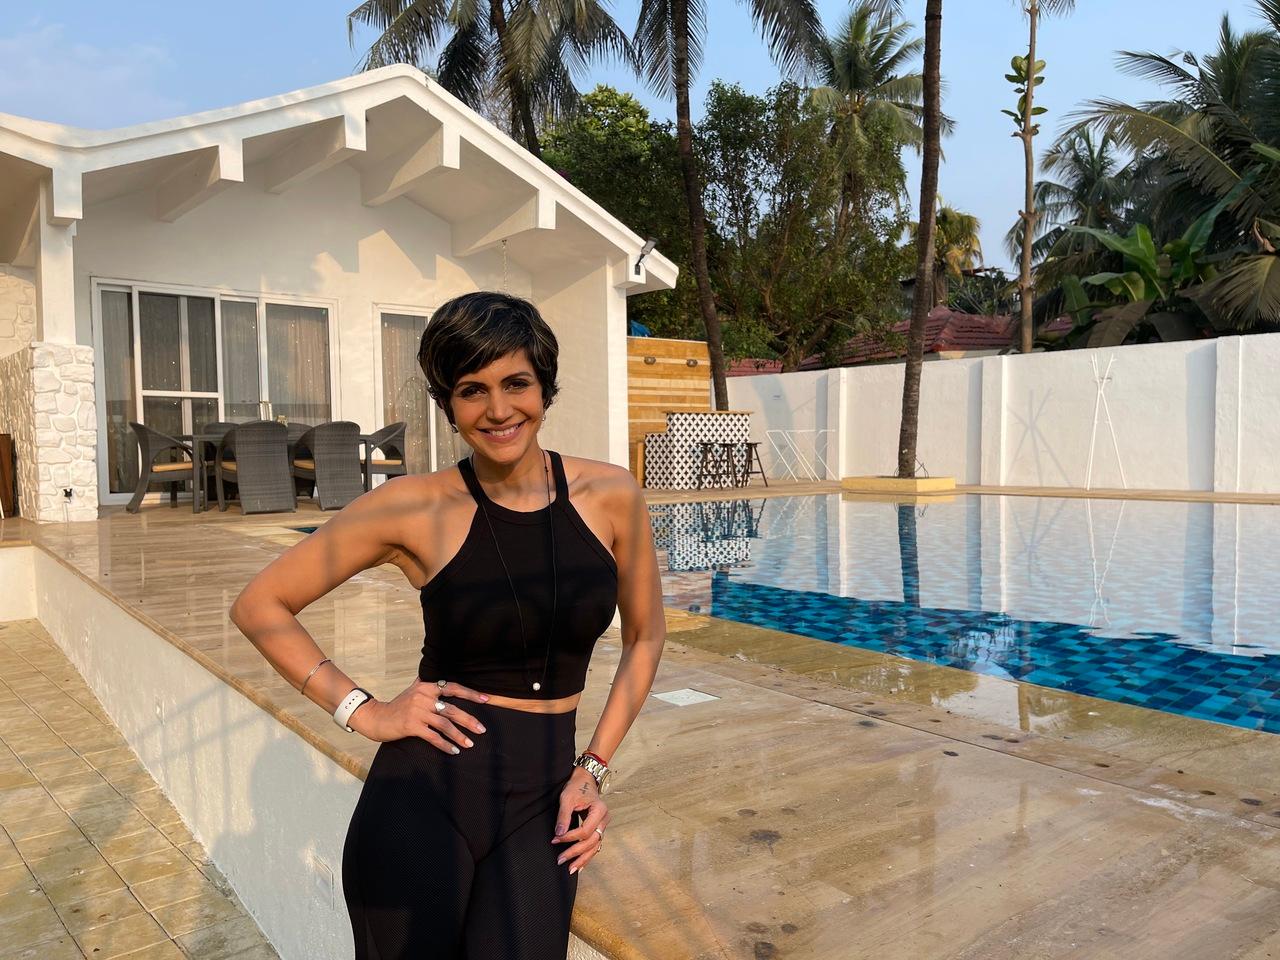 Not many know that the actress and presenter owns a lavish home in Mumbai’s Madh Island area.